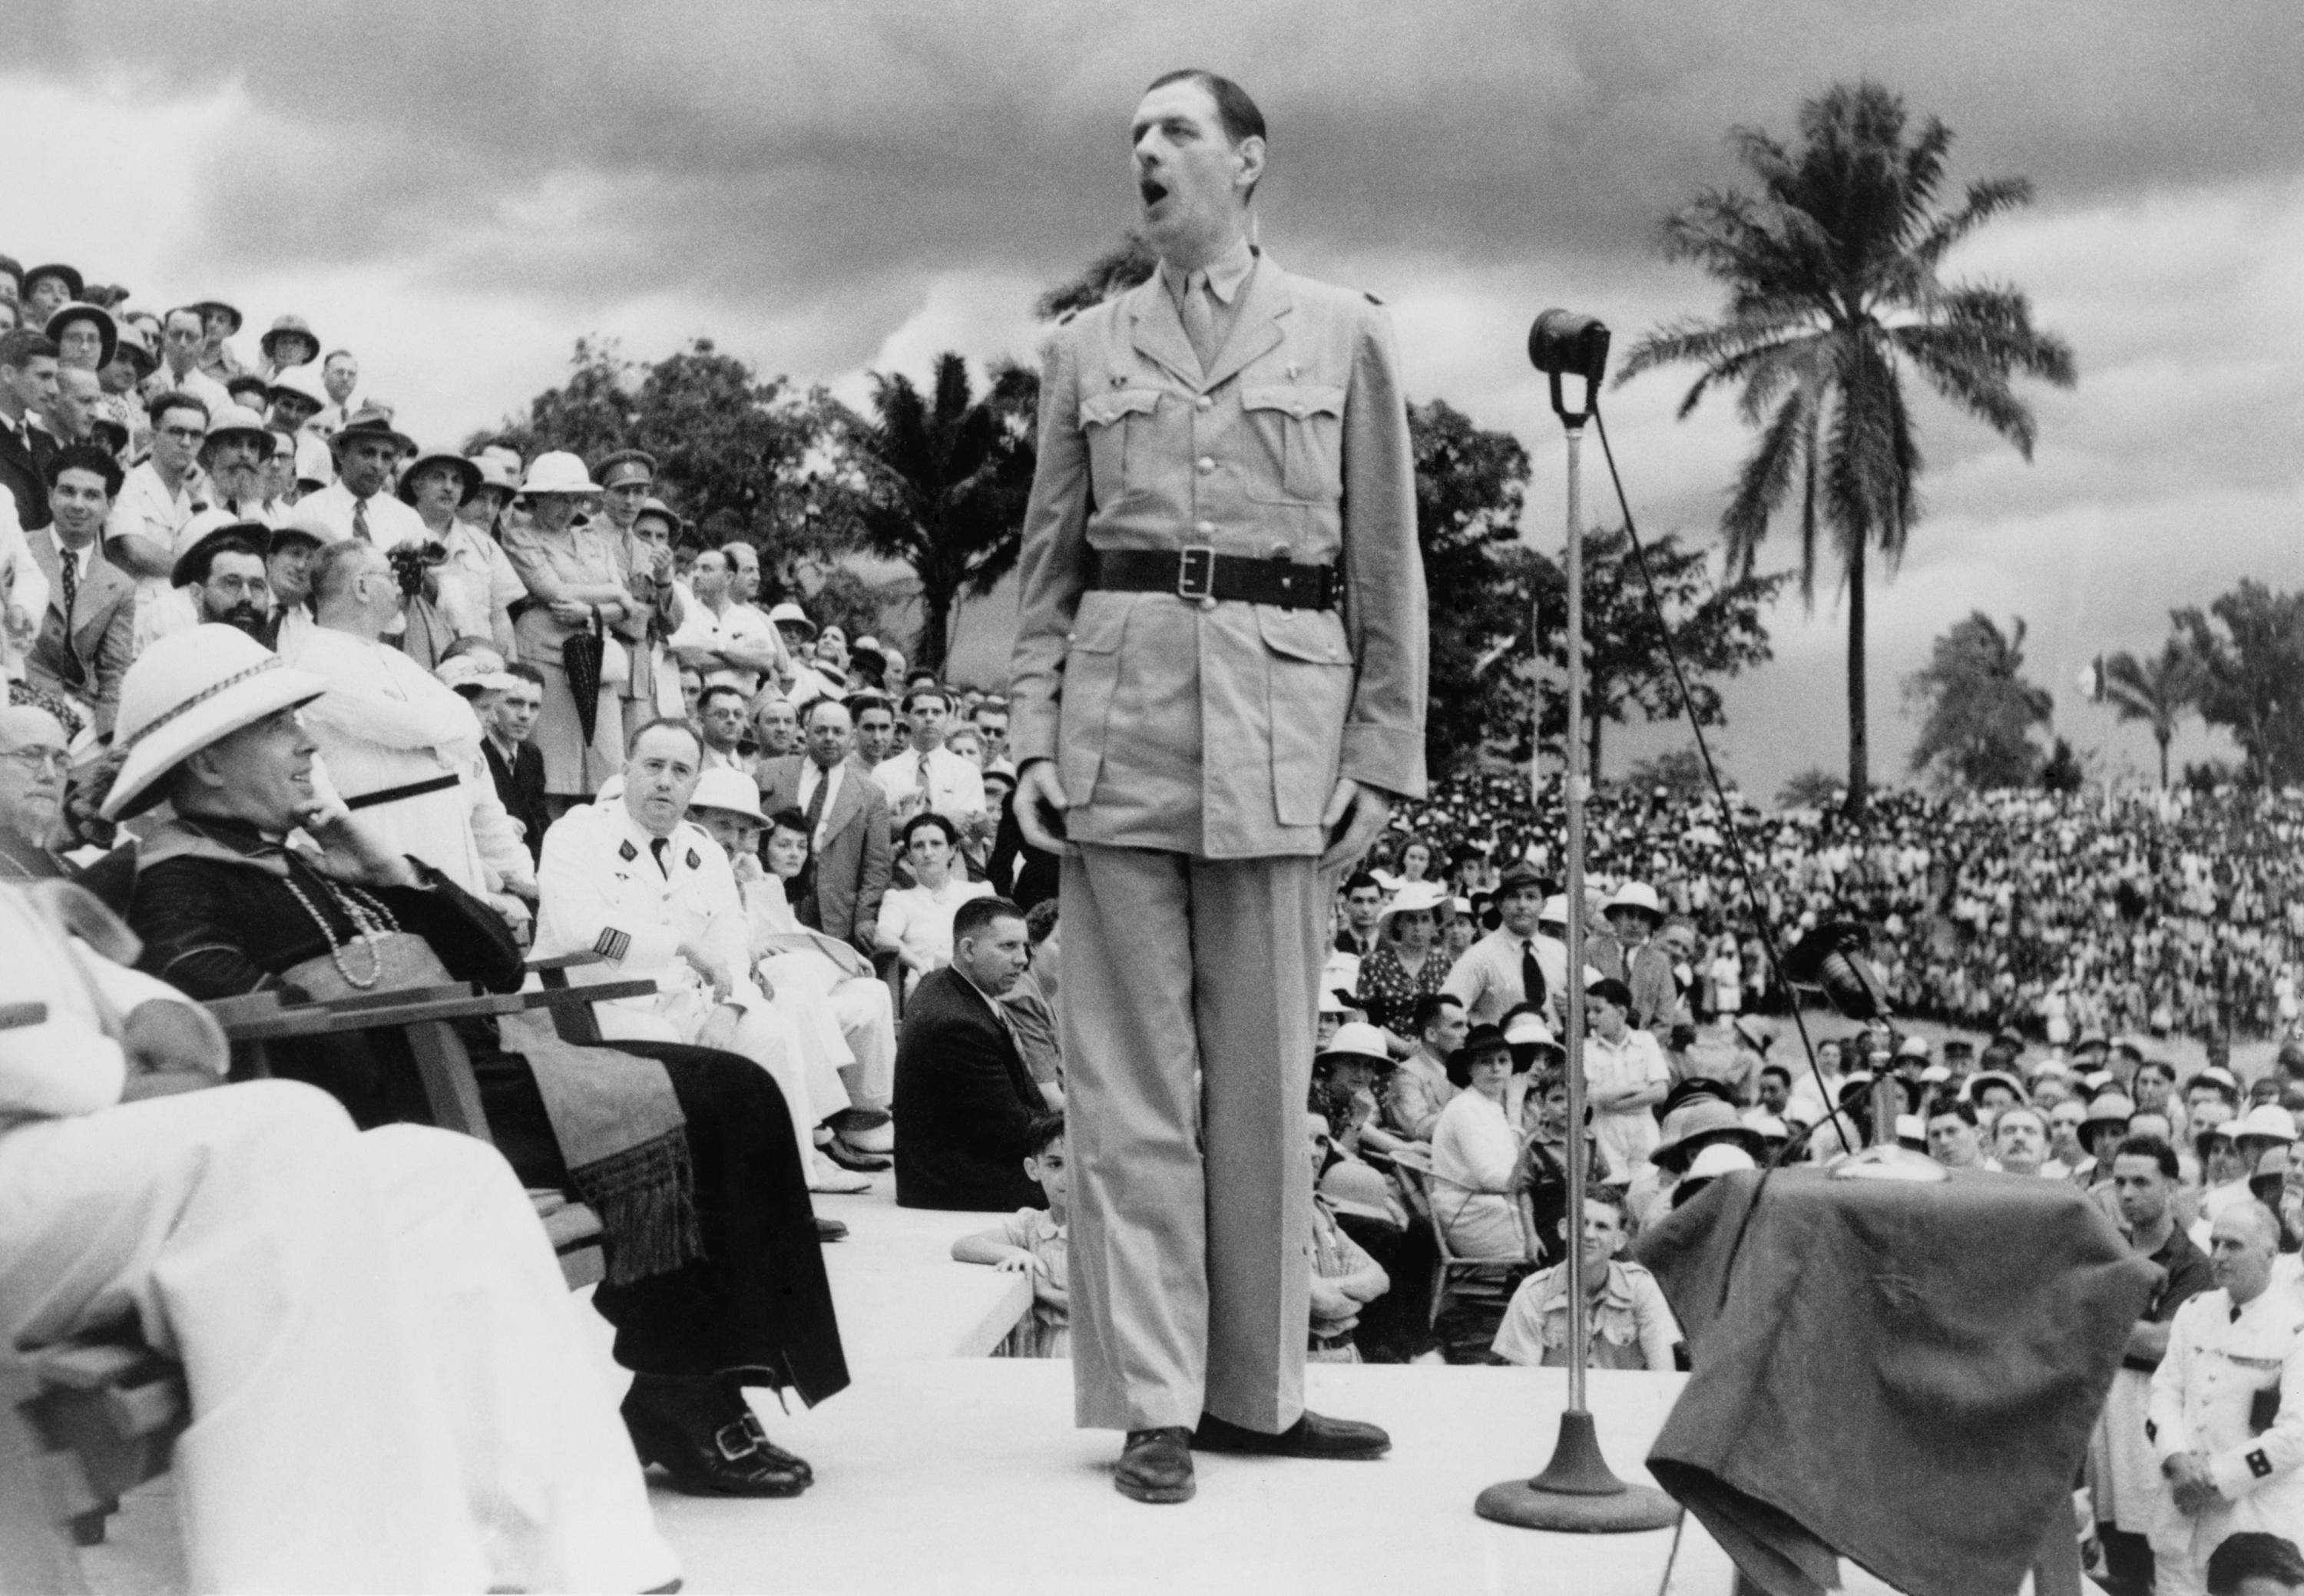 General Charles de Gaulle speaking at the African-French Conference in Brazzaville, Congo, 1944 (Everett Collection Historical/Alamy Stock Photo)